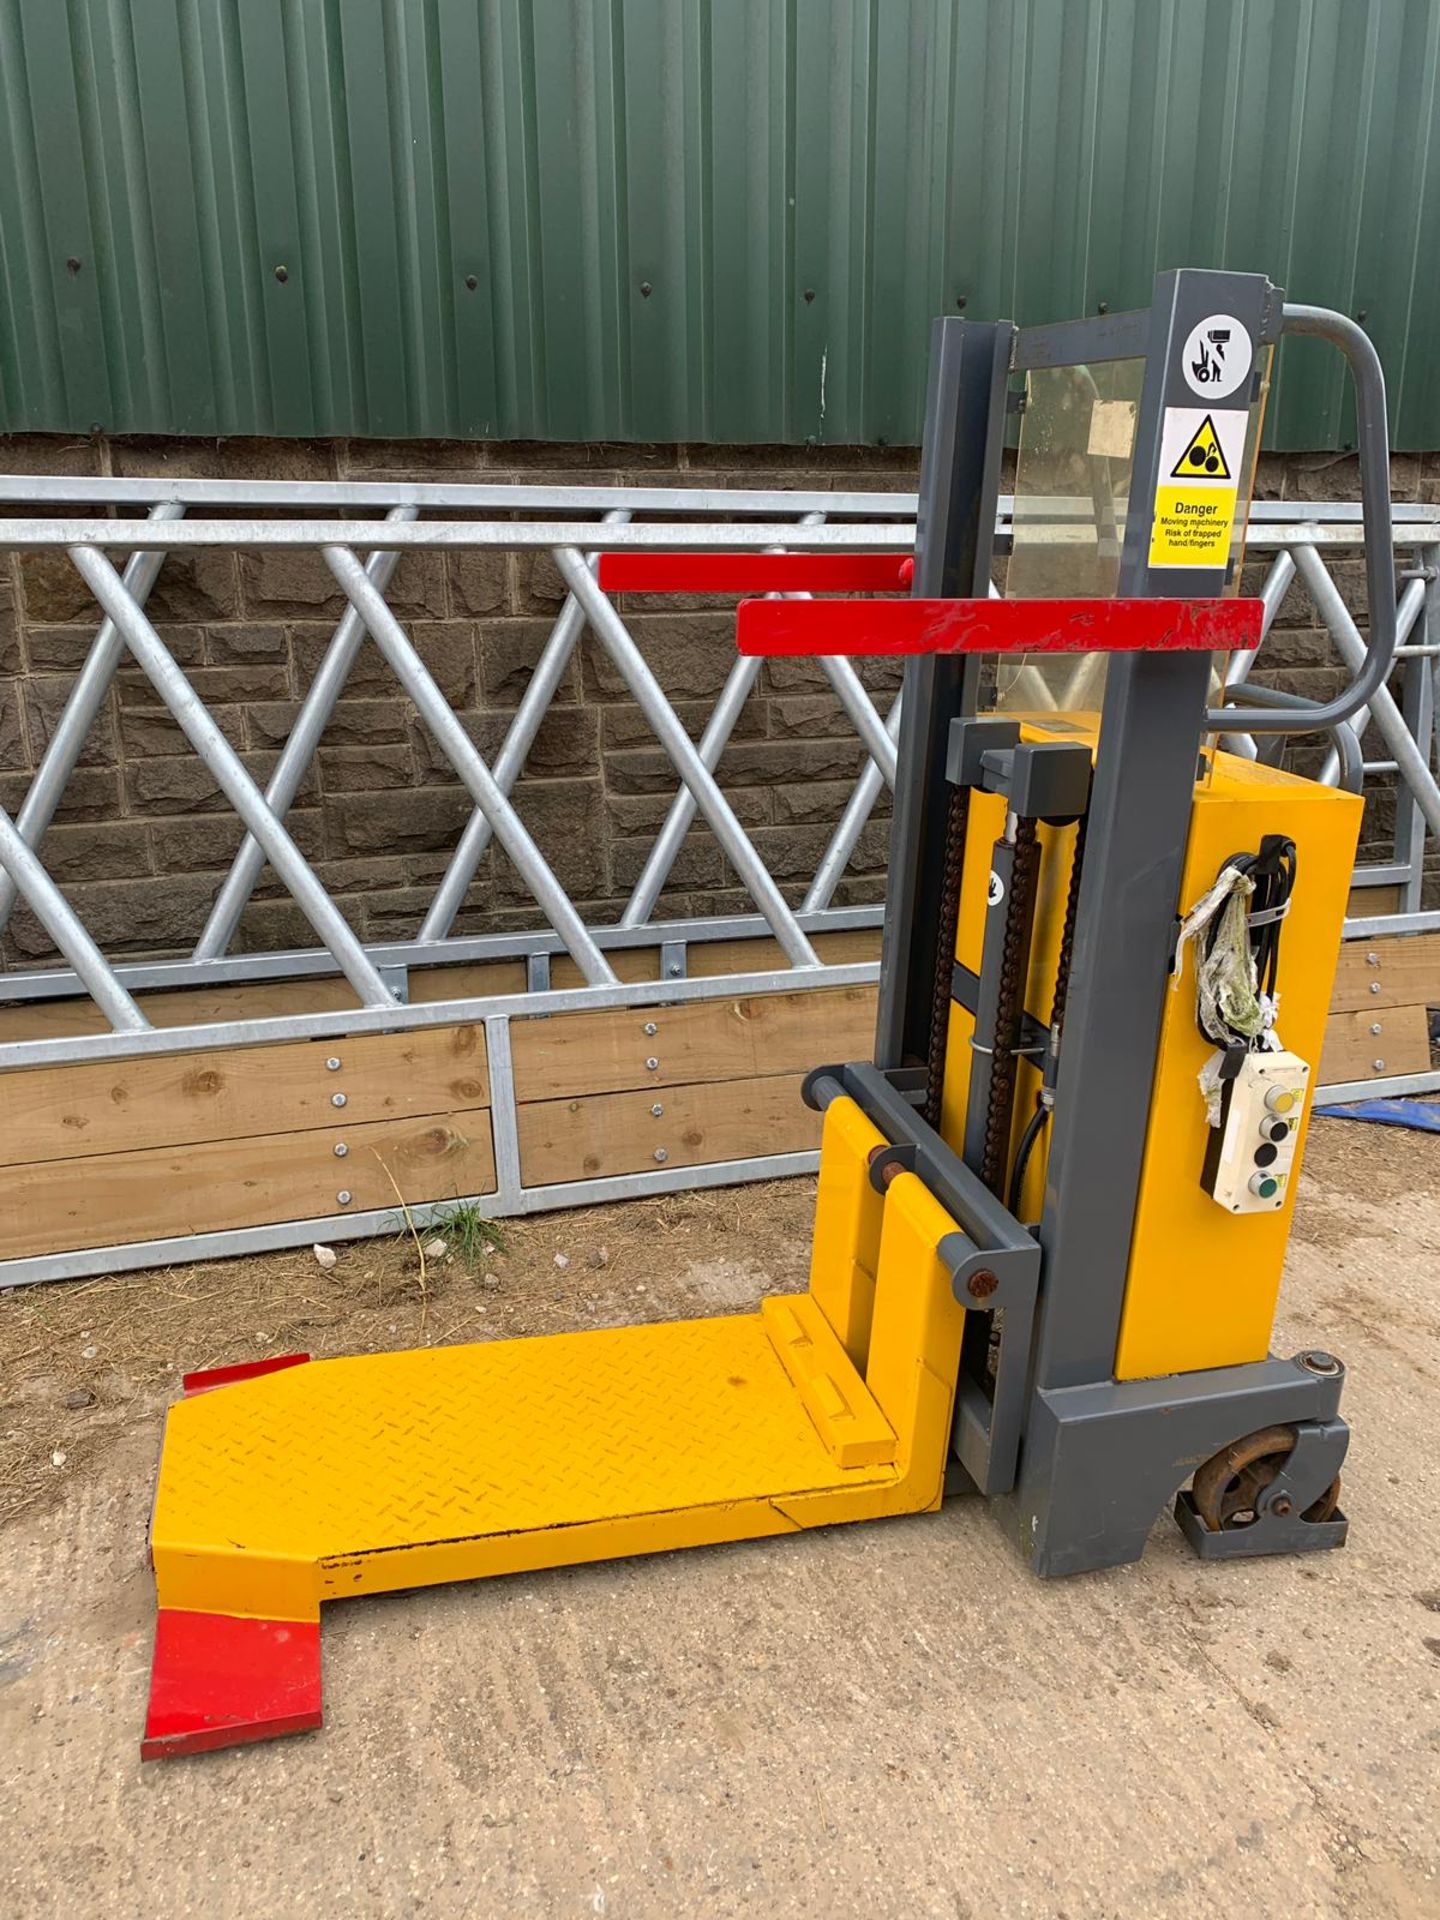 WARRIOR YM250 ELECTRIC PALLET TRUCK, WEIGHT 270 KGS, LIFT HEIGHT 1M, YEAR 2013 *PLUS VAT* - Image 2 of 9